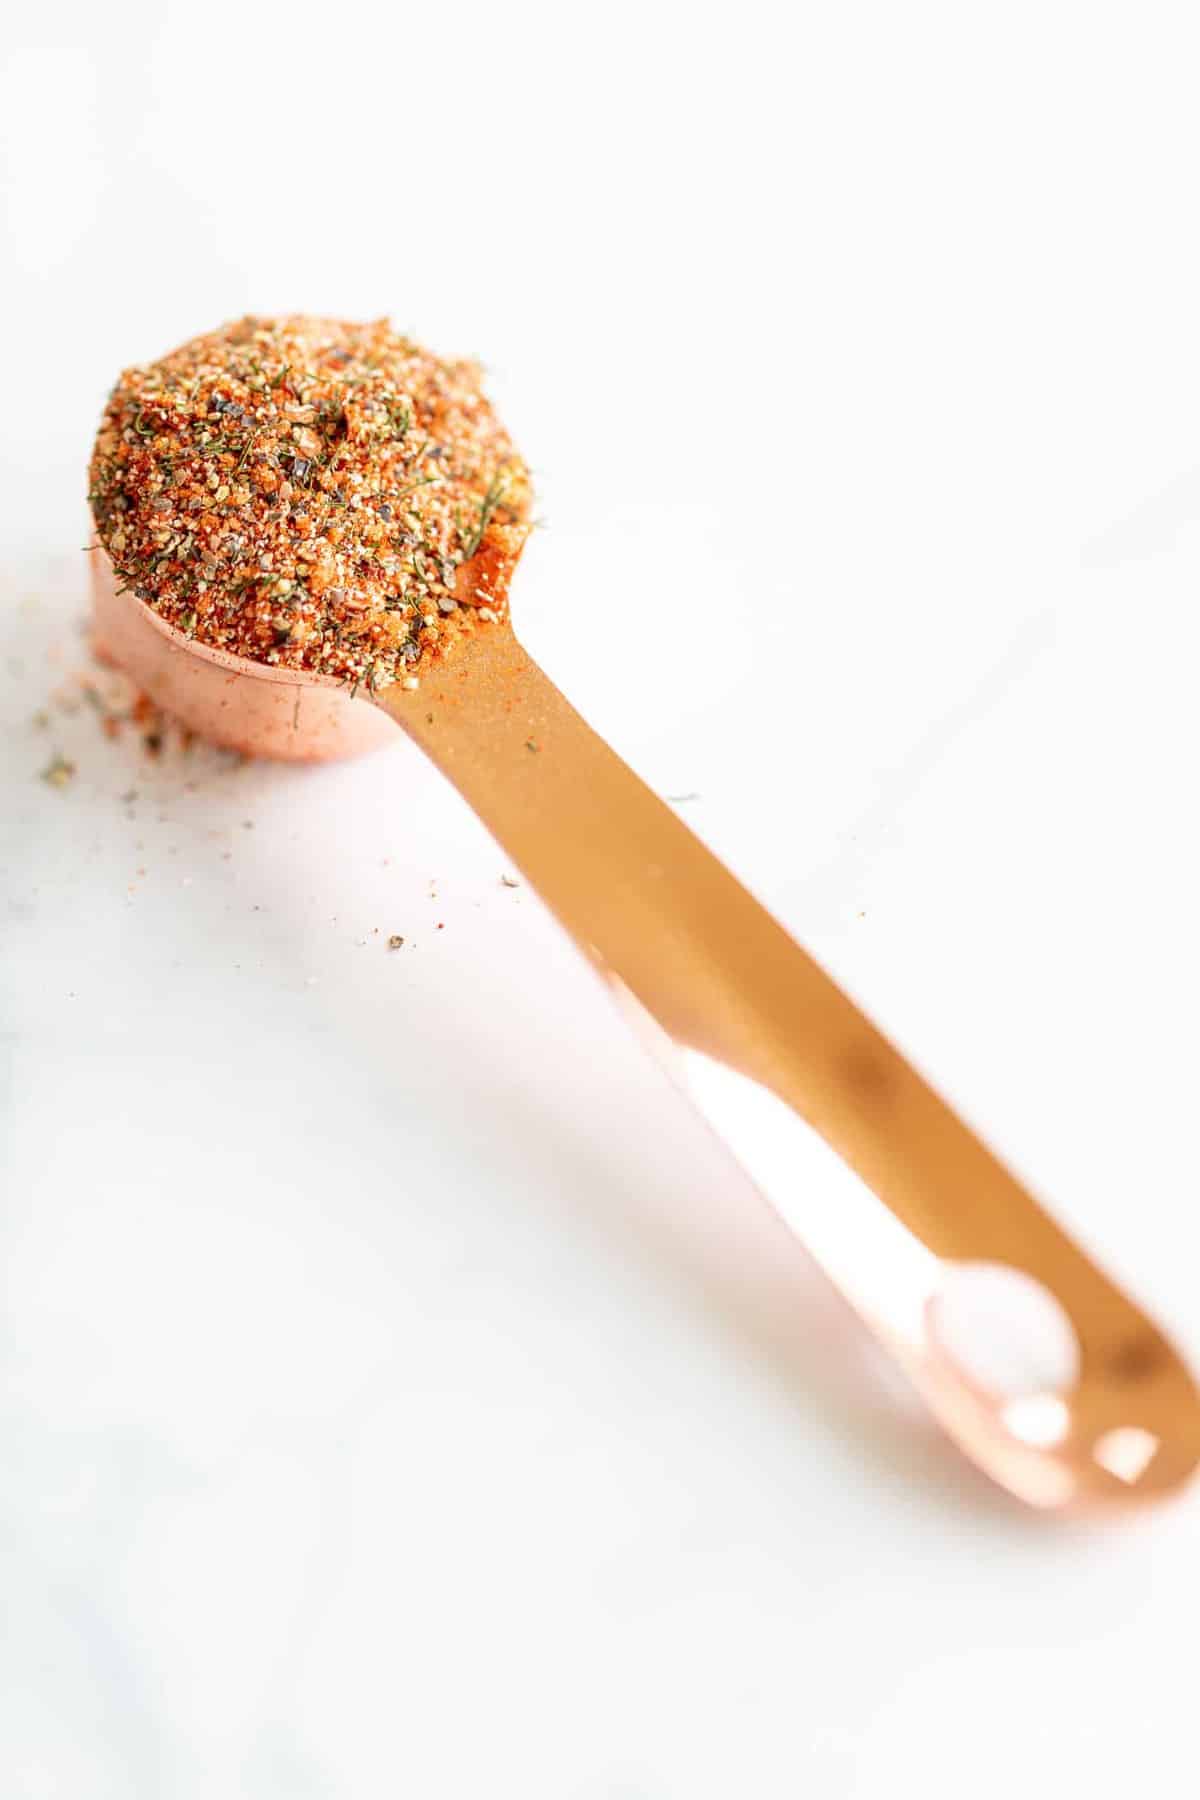 A white background with a copper measuring spoon filled with steak seasoning blend on top.